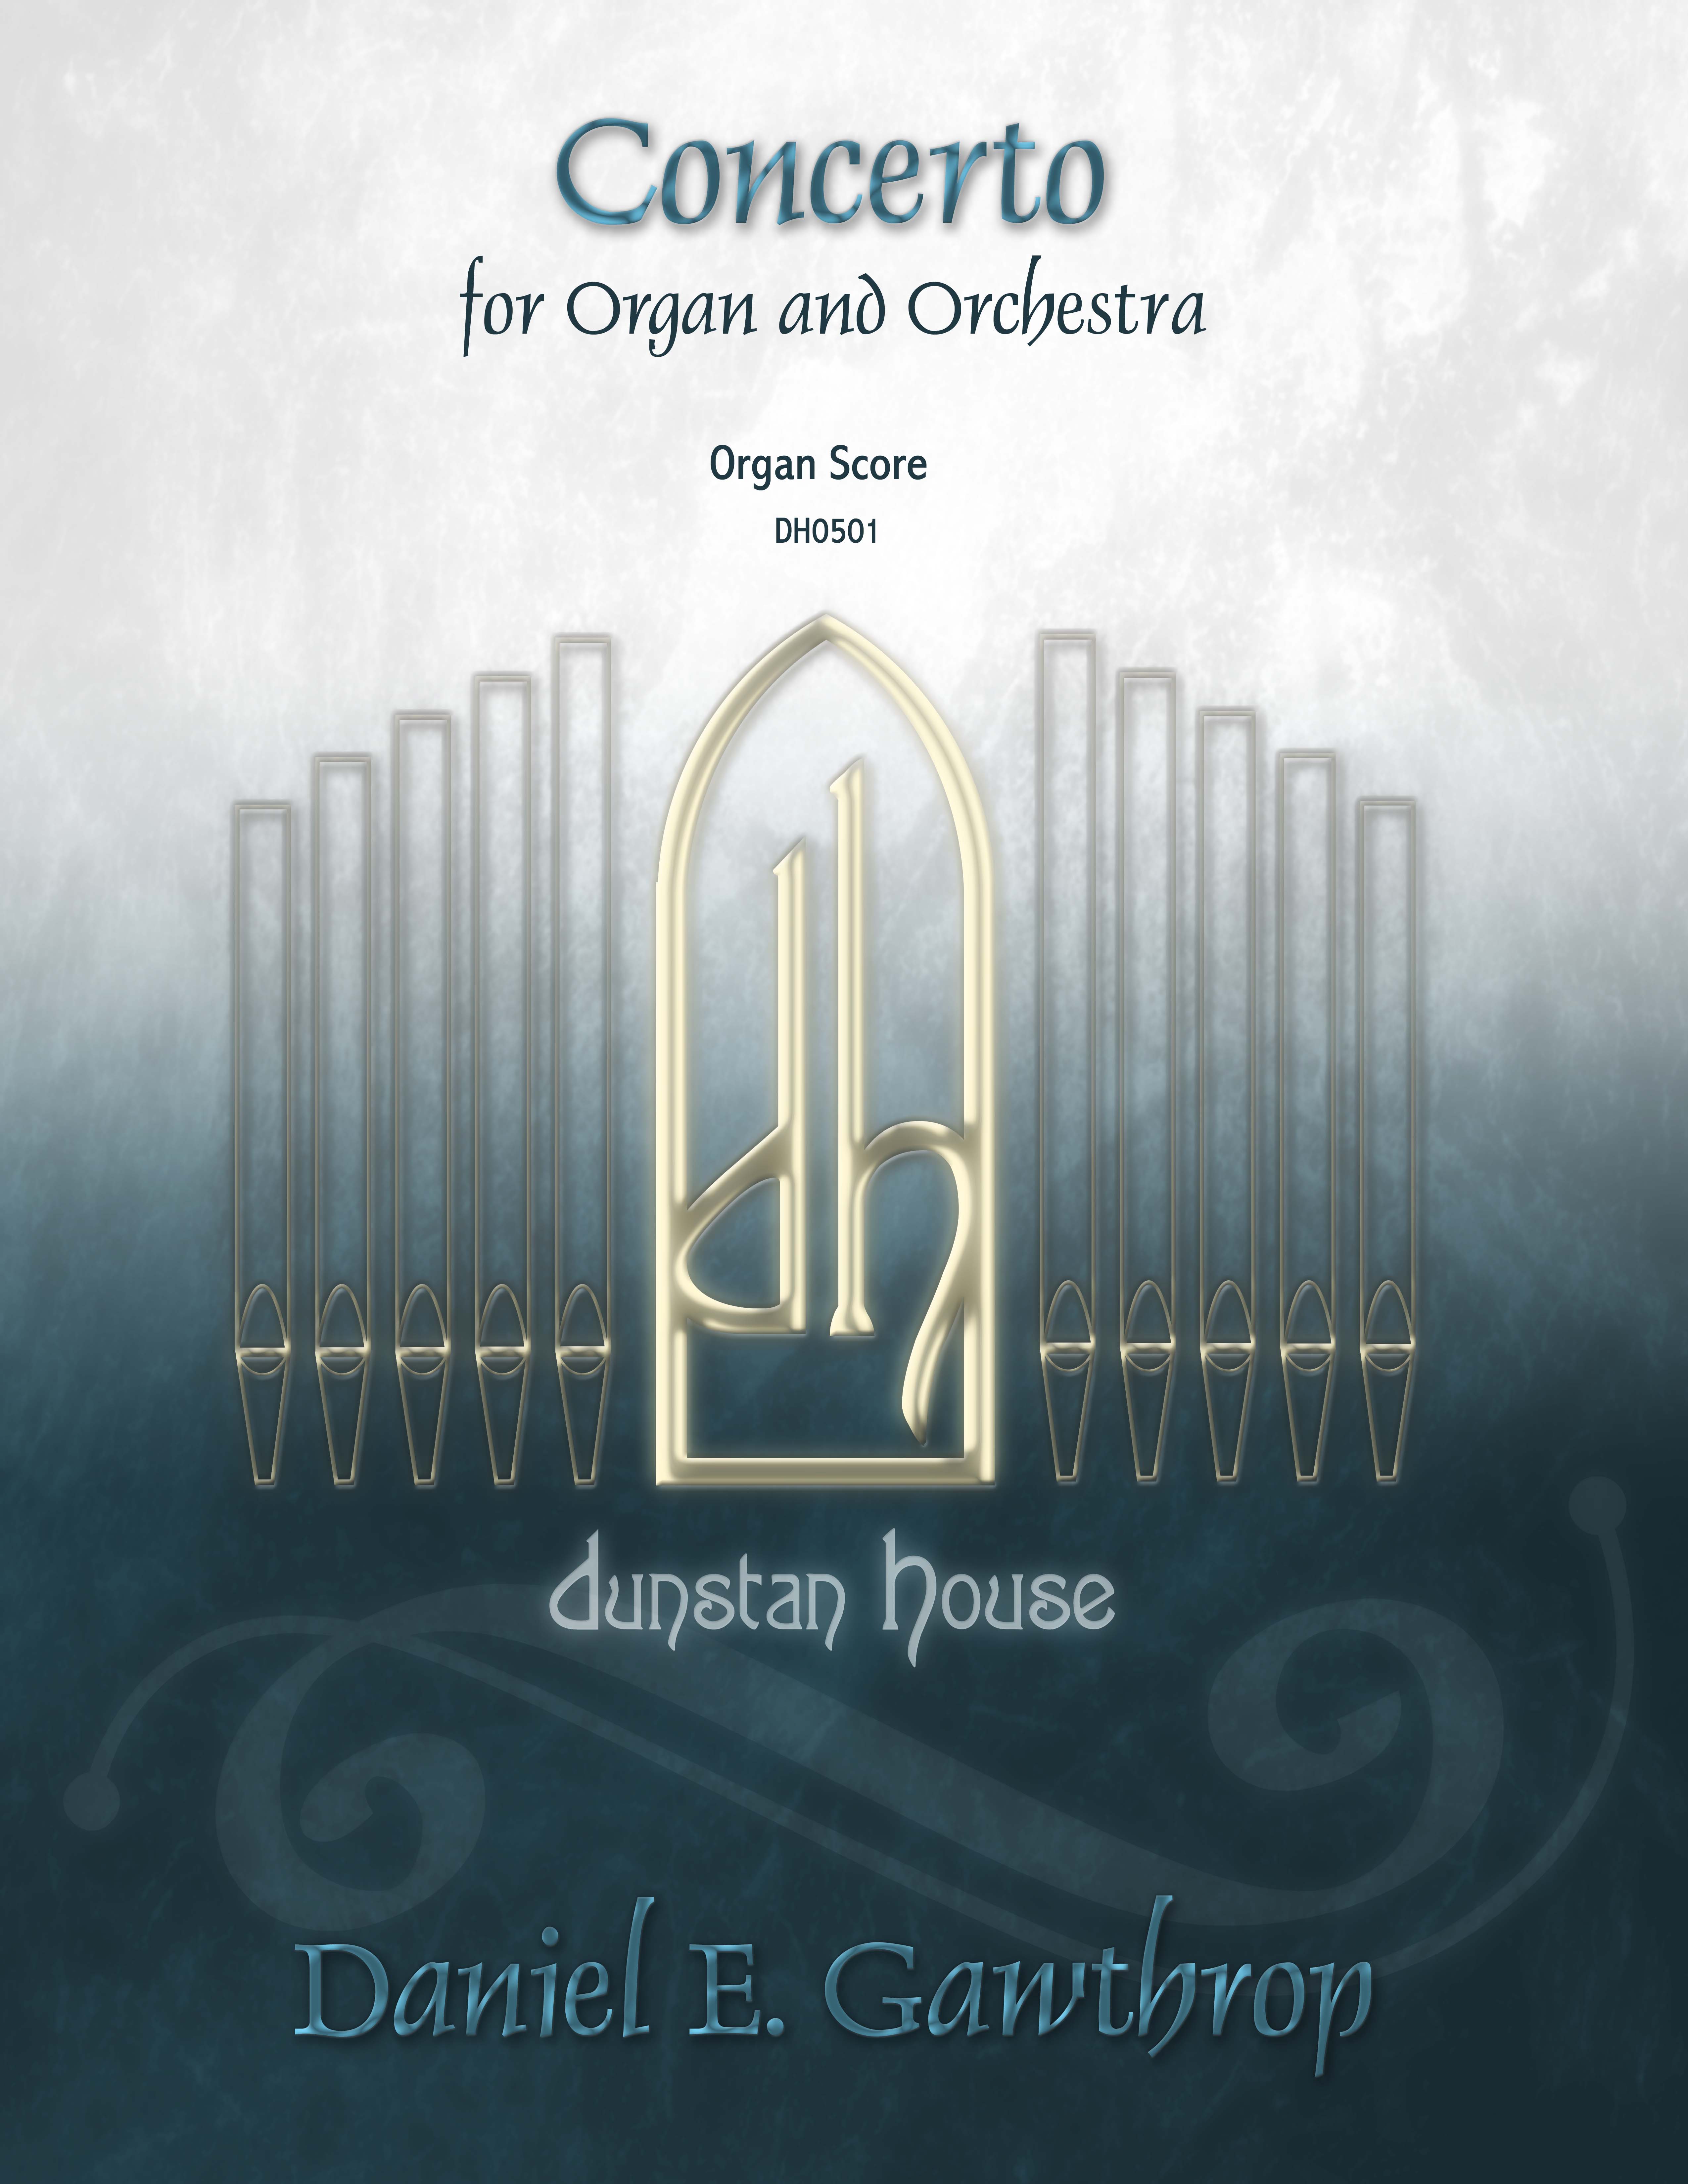 Concert for Organ and Orchestra